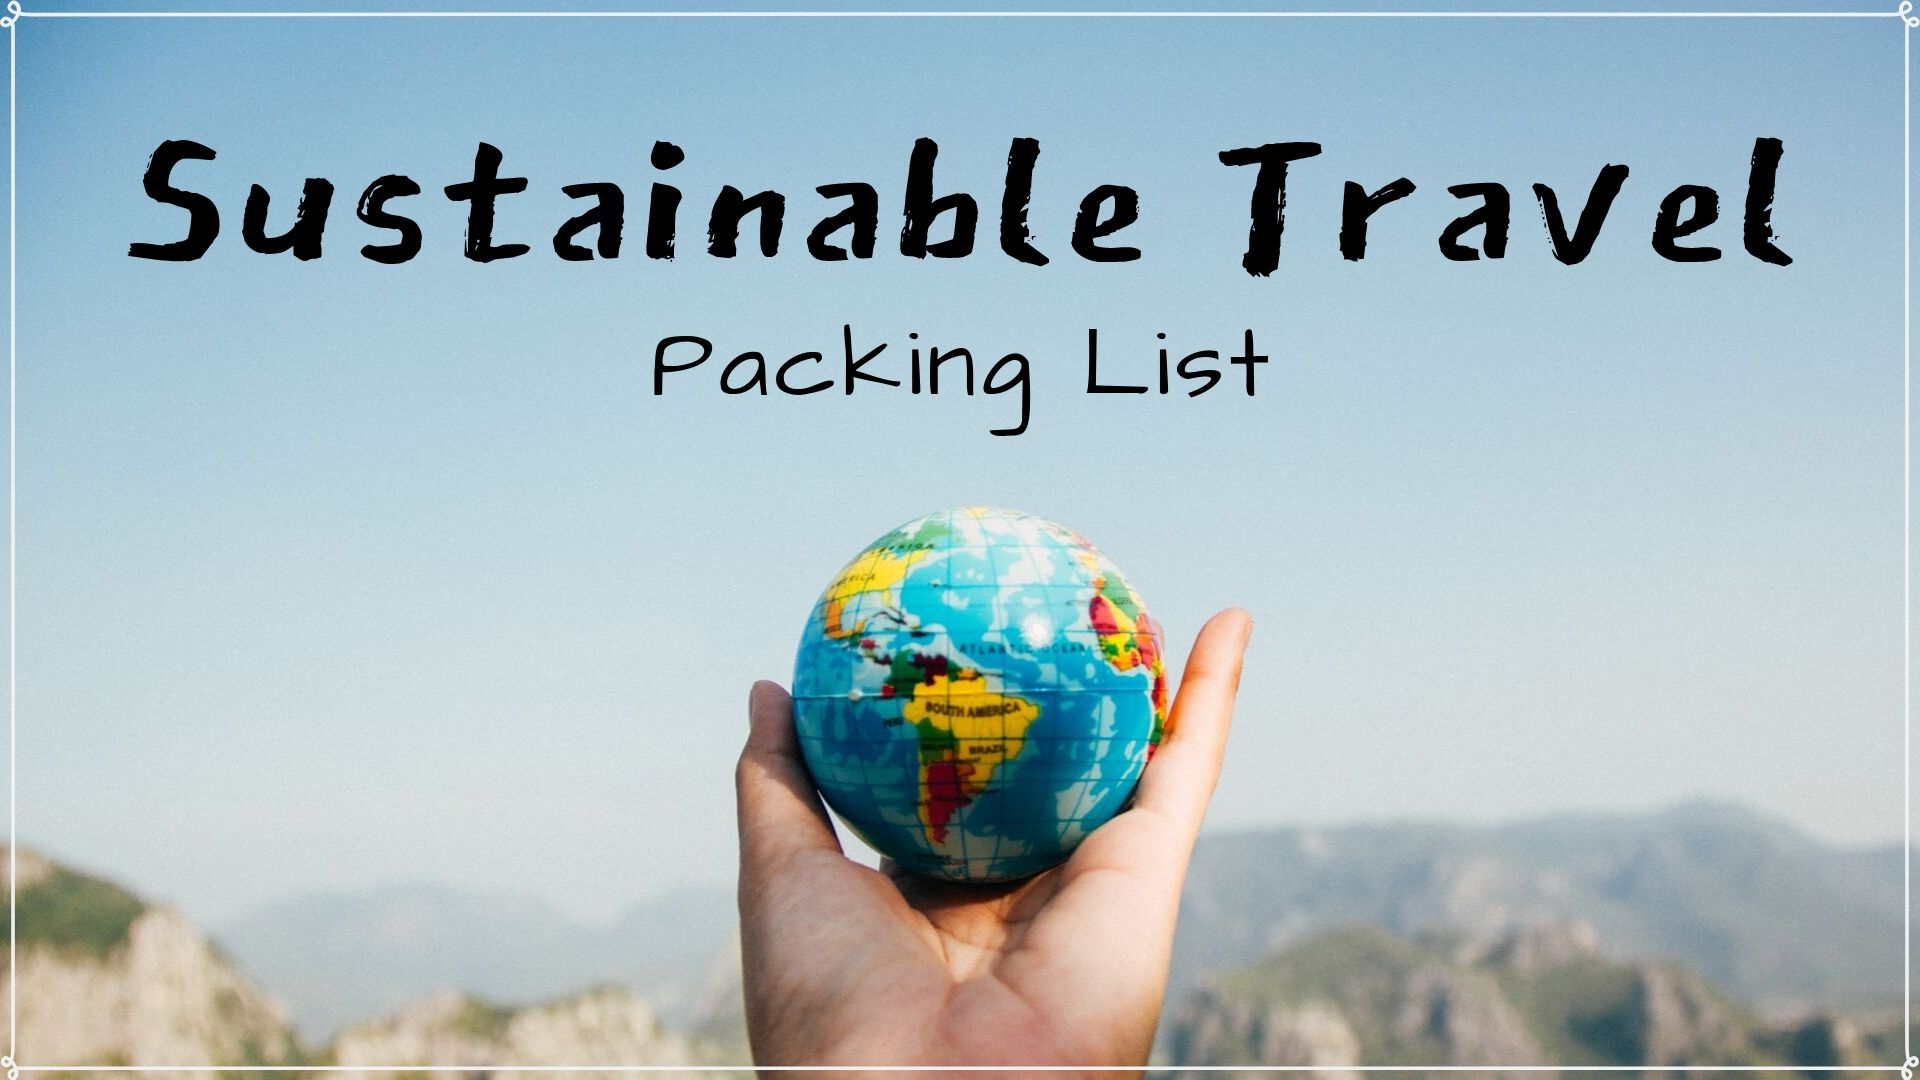 Sustainable travel packing list, what to pack to travel sustainably and lower your carbon footprint. Reusable bag, shampoo bars, earth-friendly products, reduce plastic use pinterest Cover